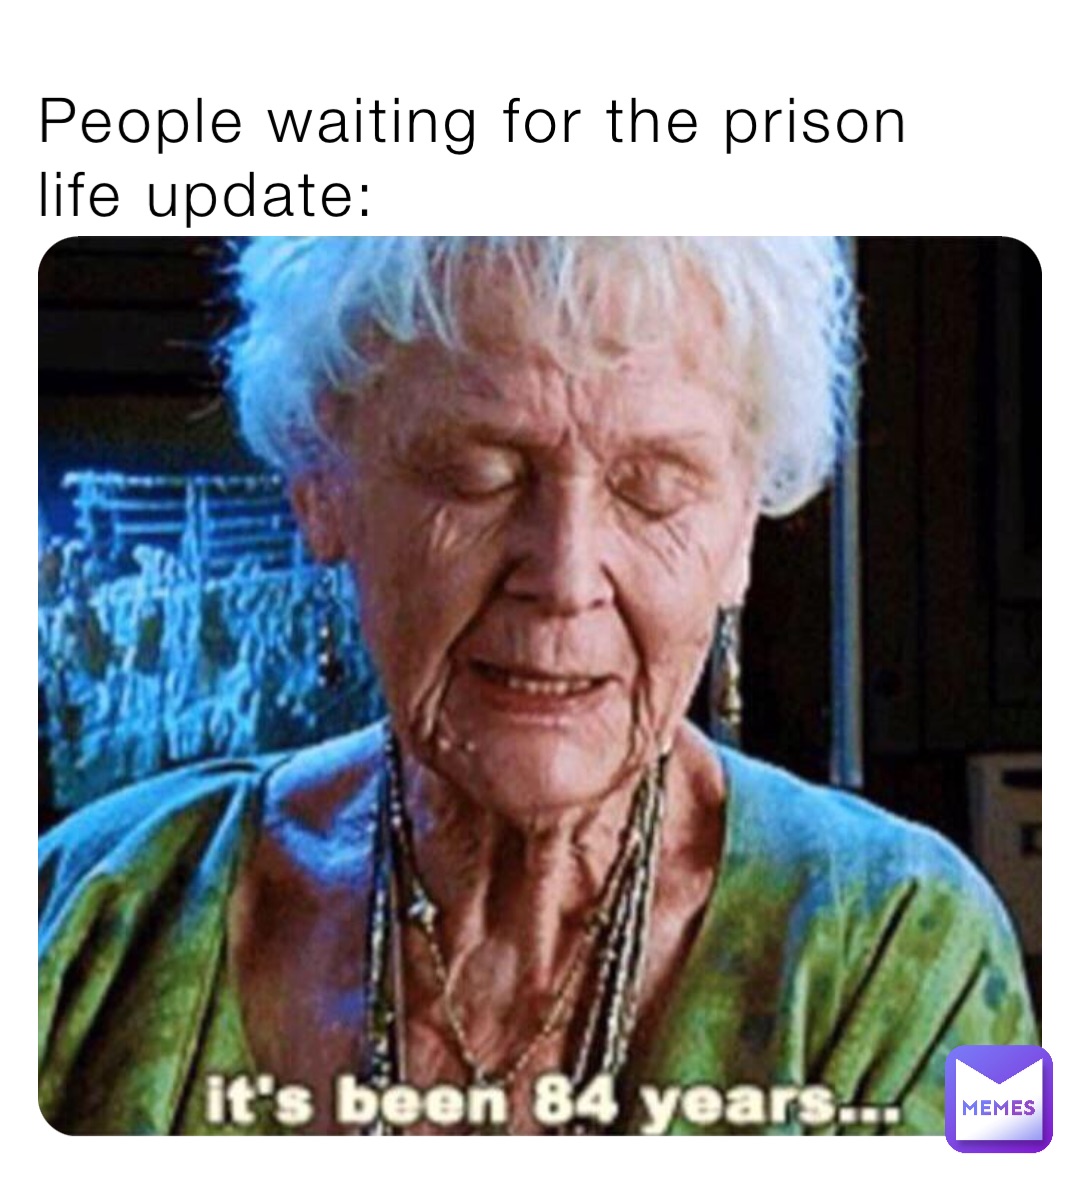 People waiting for the prison life update: